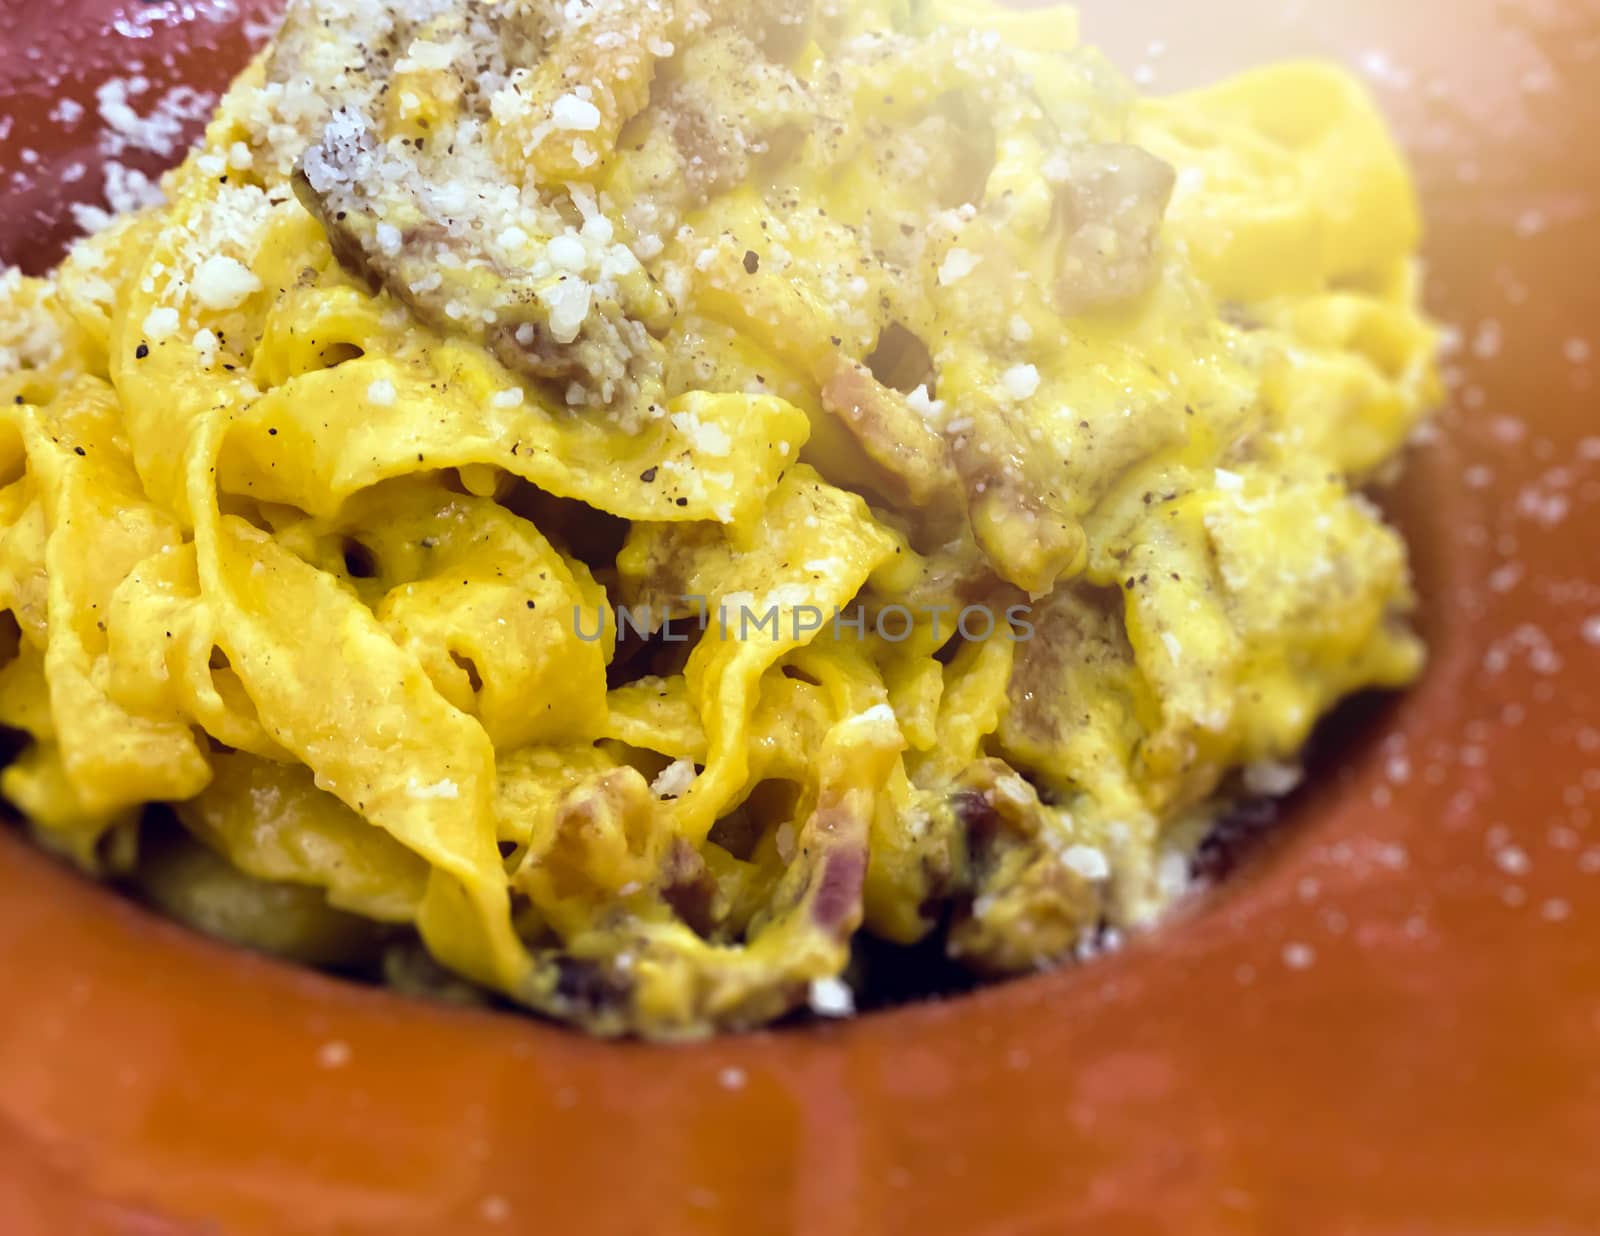 close-up view of a portion of pasta with carbonara sauce cooked with eggs, bacon and topped with pecorino cheese and parmesan. Typical Italian food and cuisine.